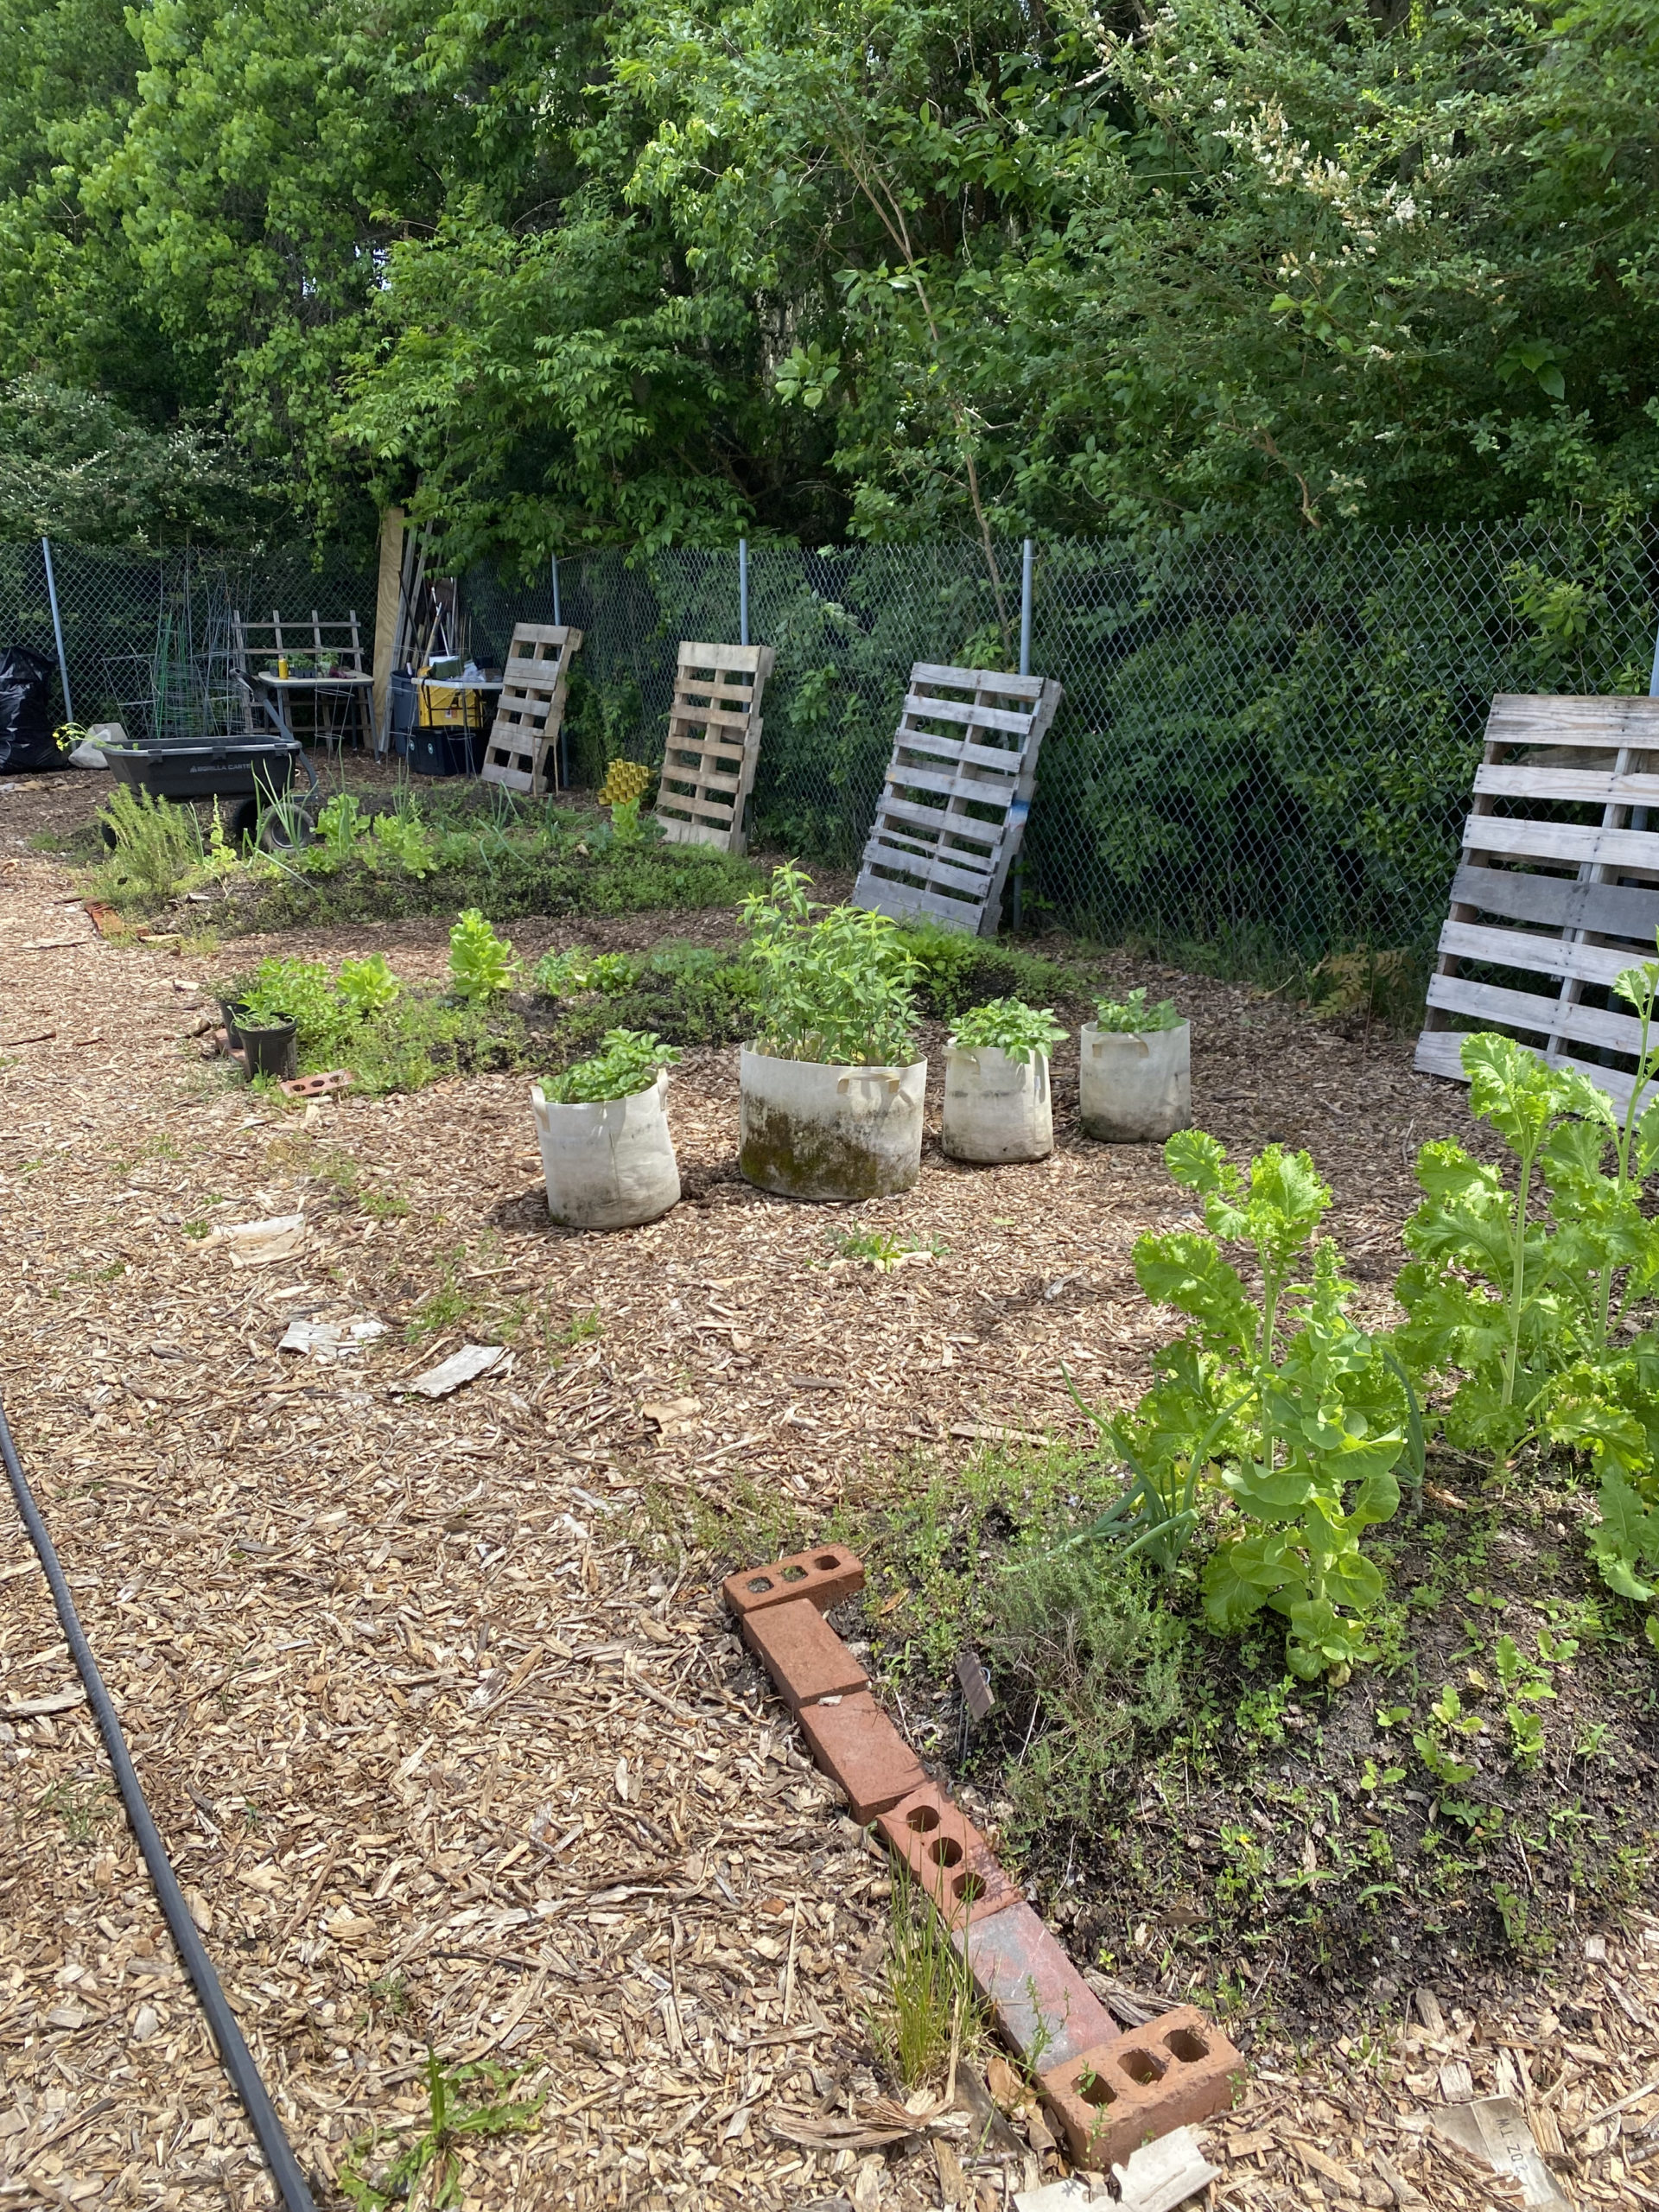 After photo of the community garden